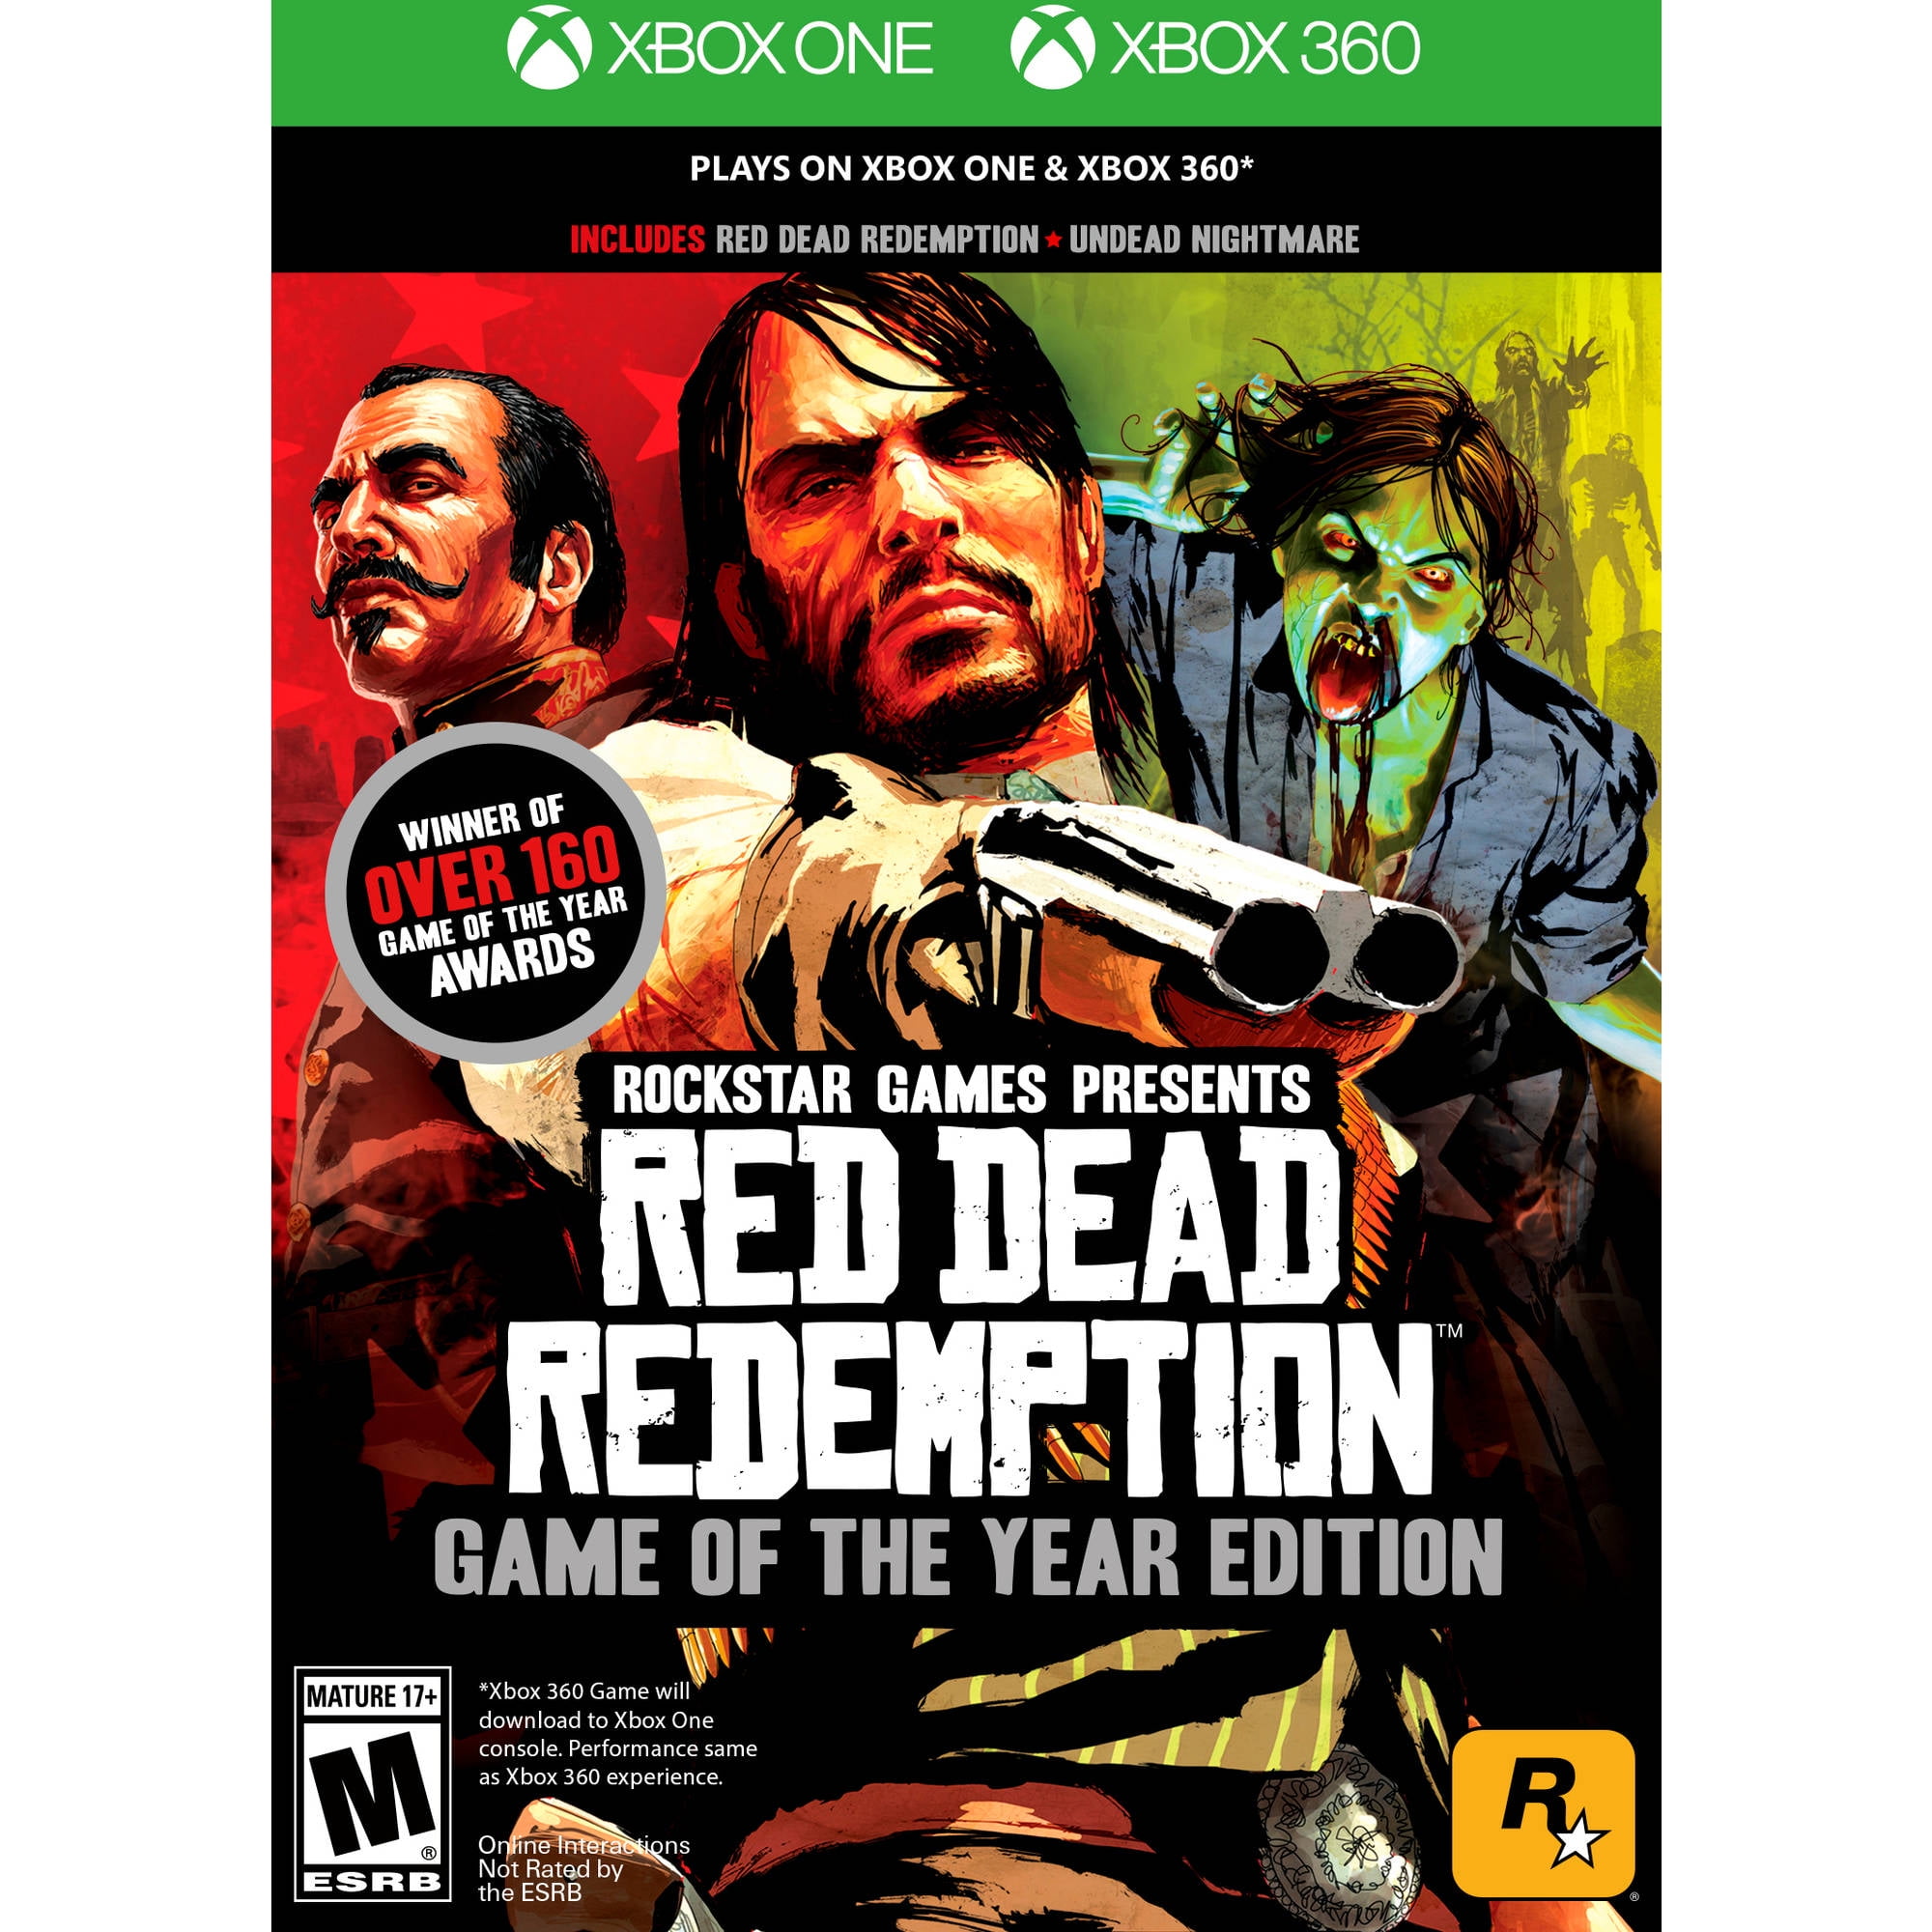 alarm leef ermee Speciaal Red Dead Redemption: Game of the Year Edition - Xbox One, Xbox 360 -  Walmart.com